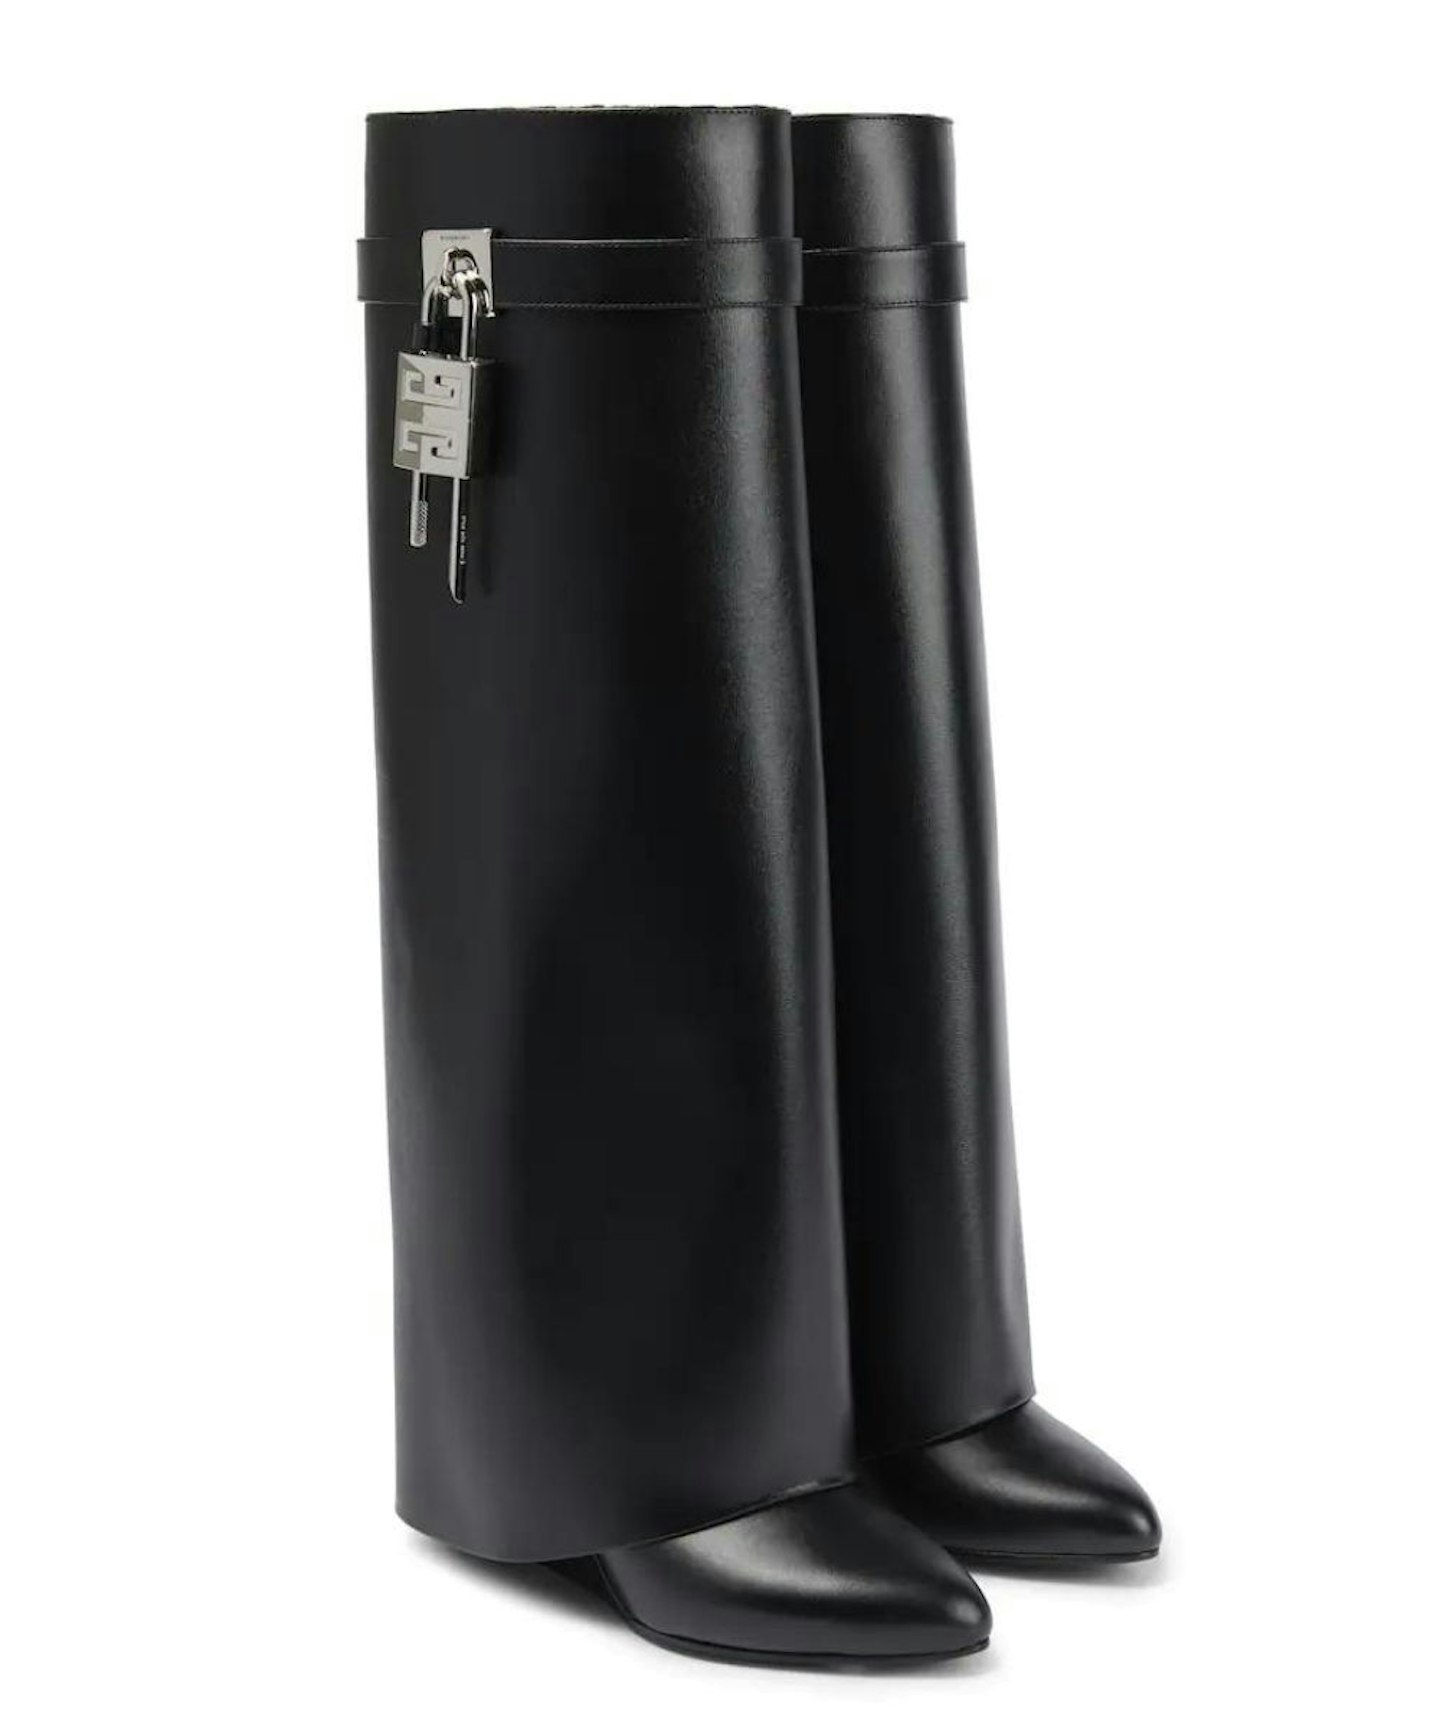 Givenchy, Shark Lock Leather Knee-High Boots